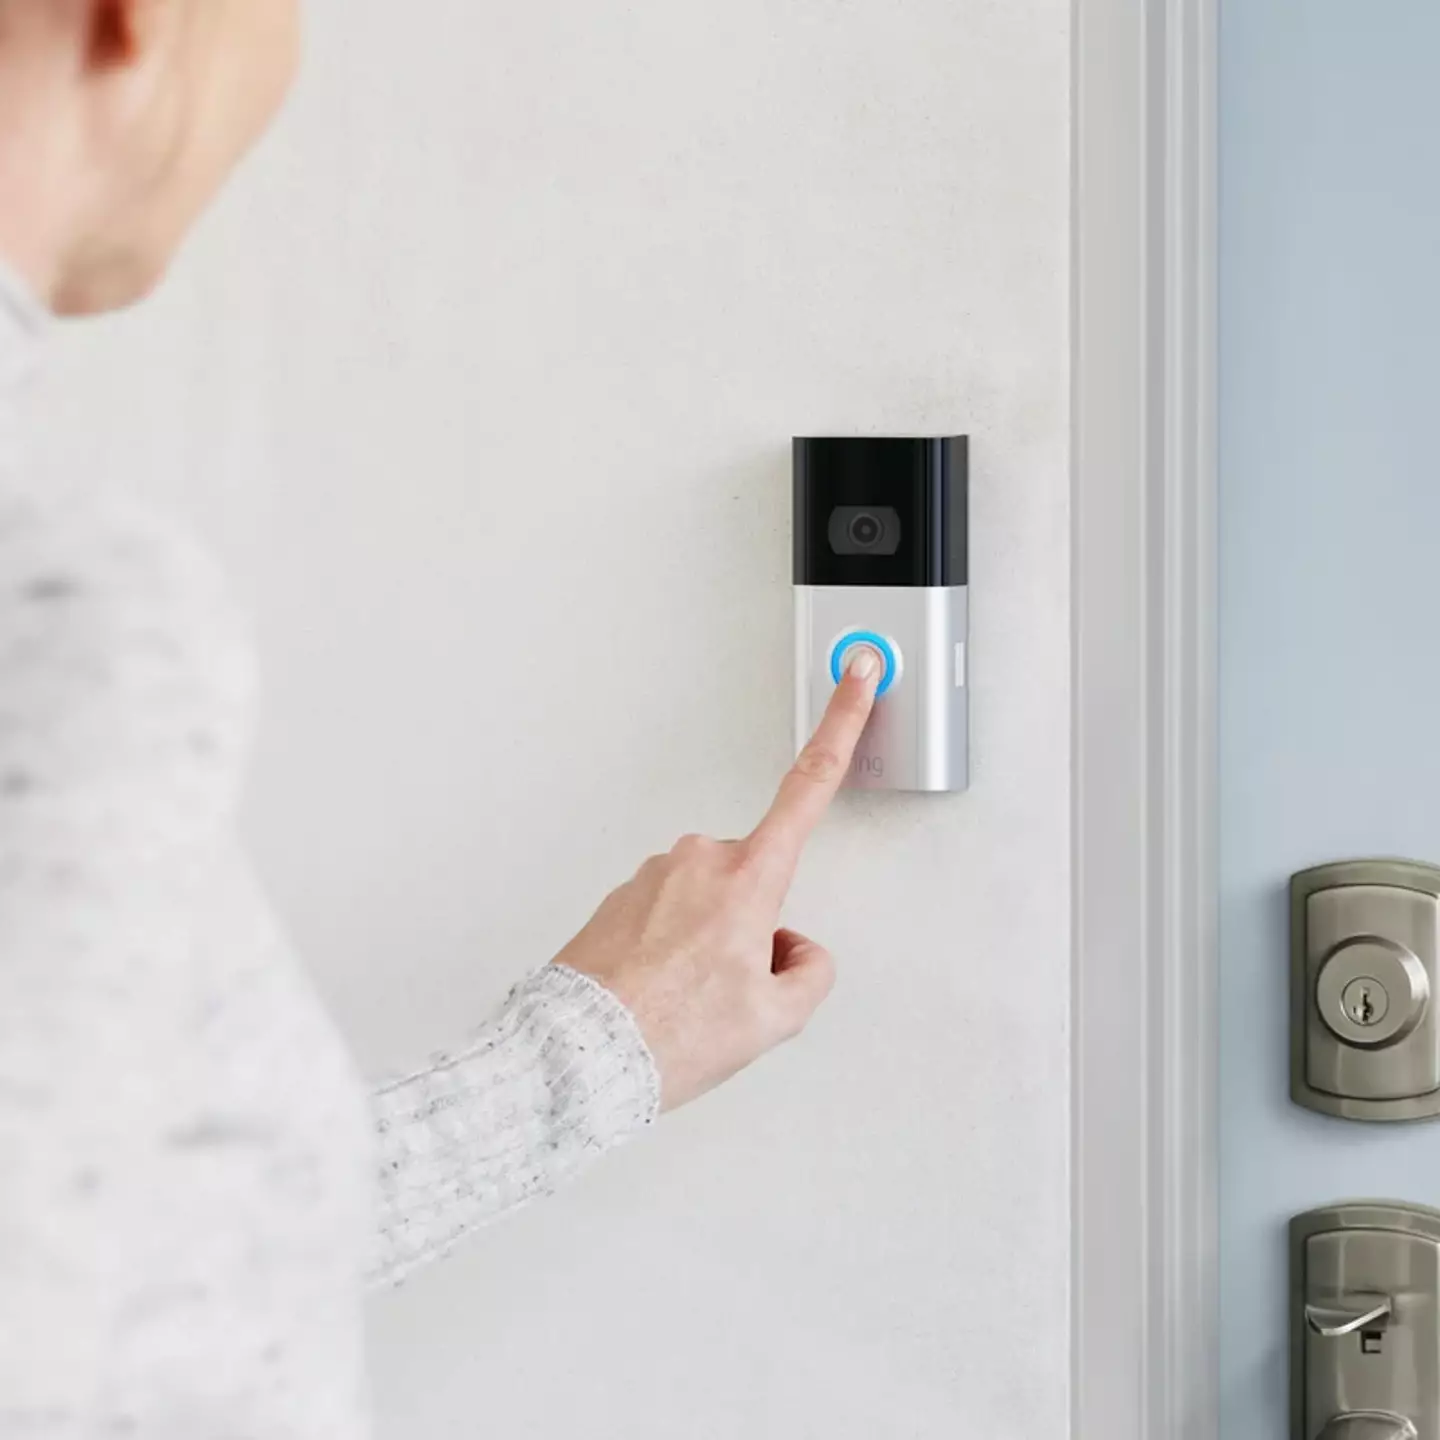 Users of the portable outdoor camera have been informed via email that the smart doorbell company would be increasing the price of its plan.